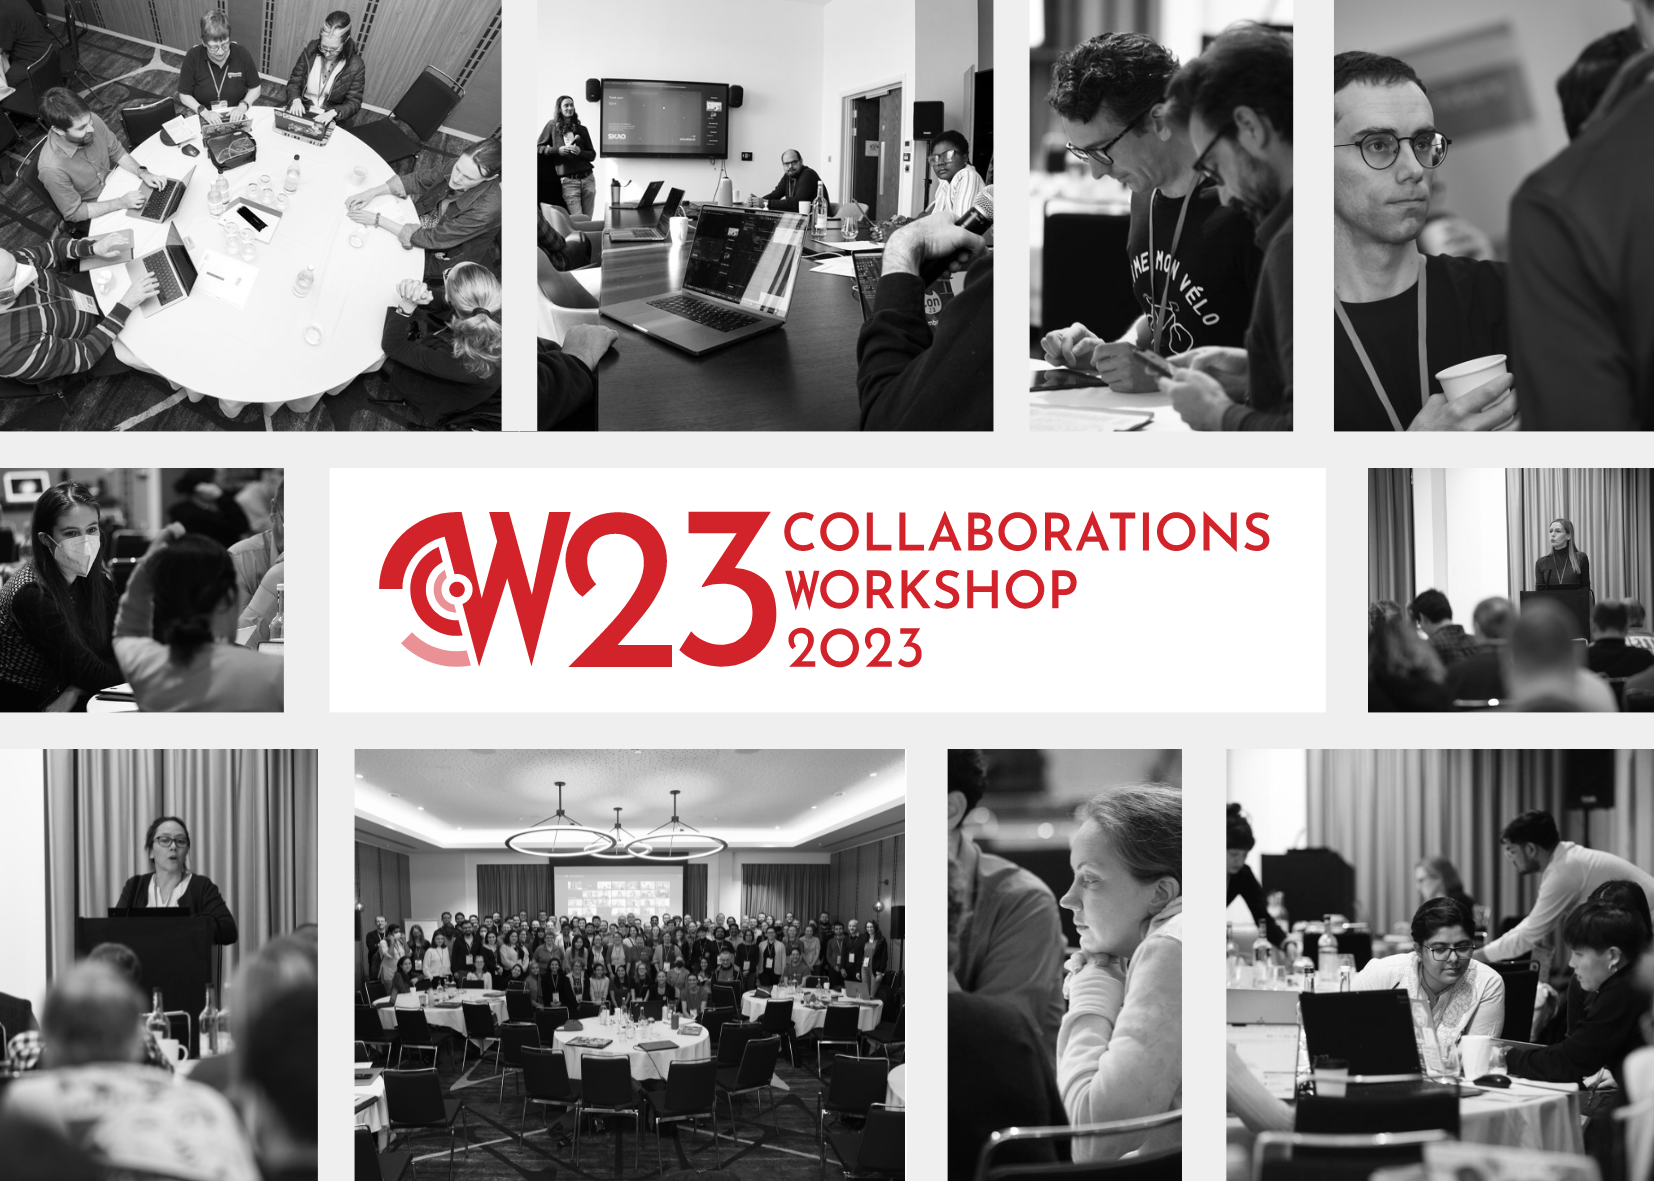 CW23 logo and images showing conference participants